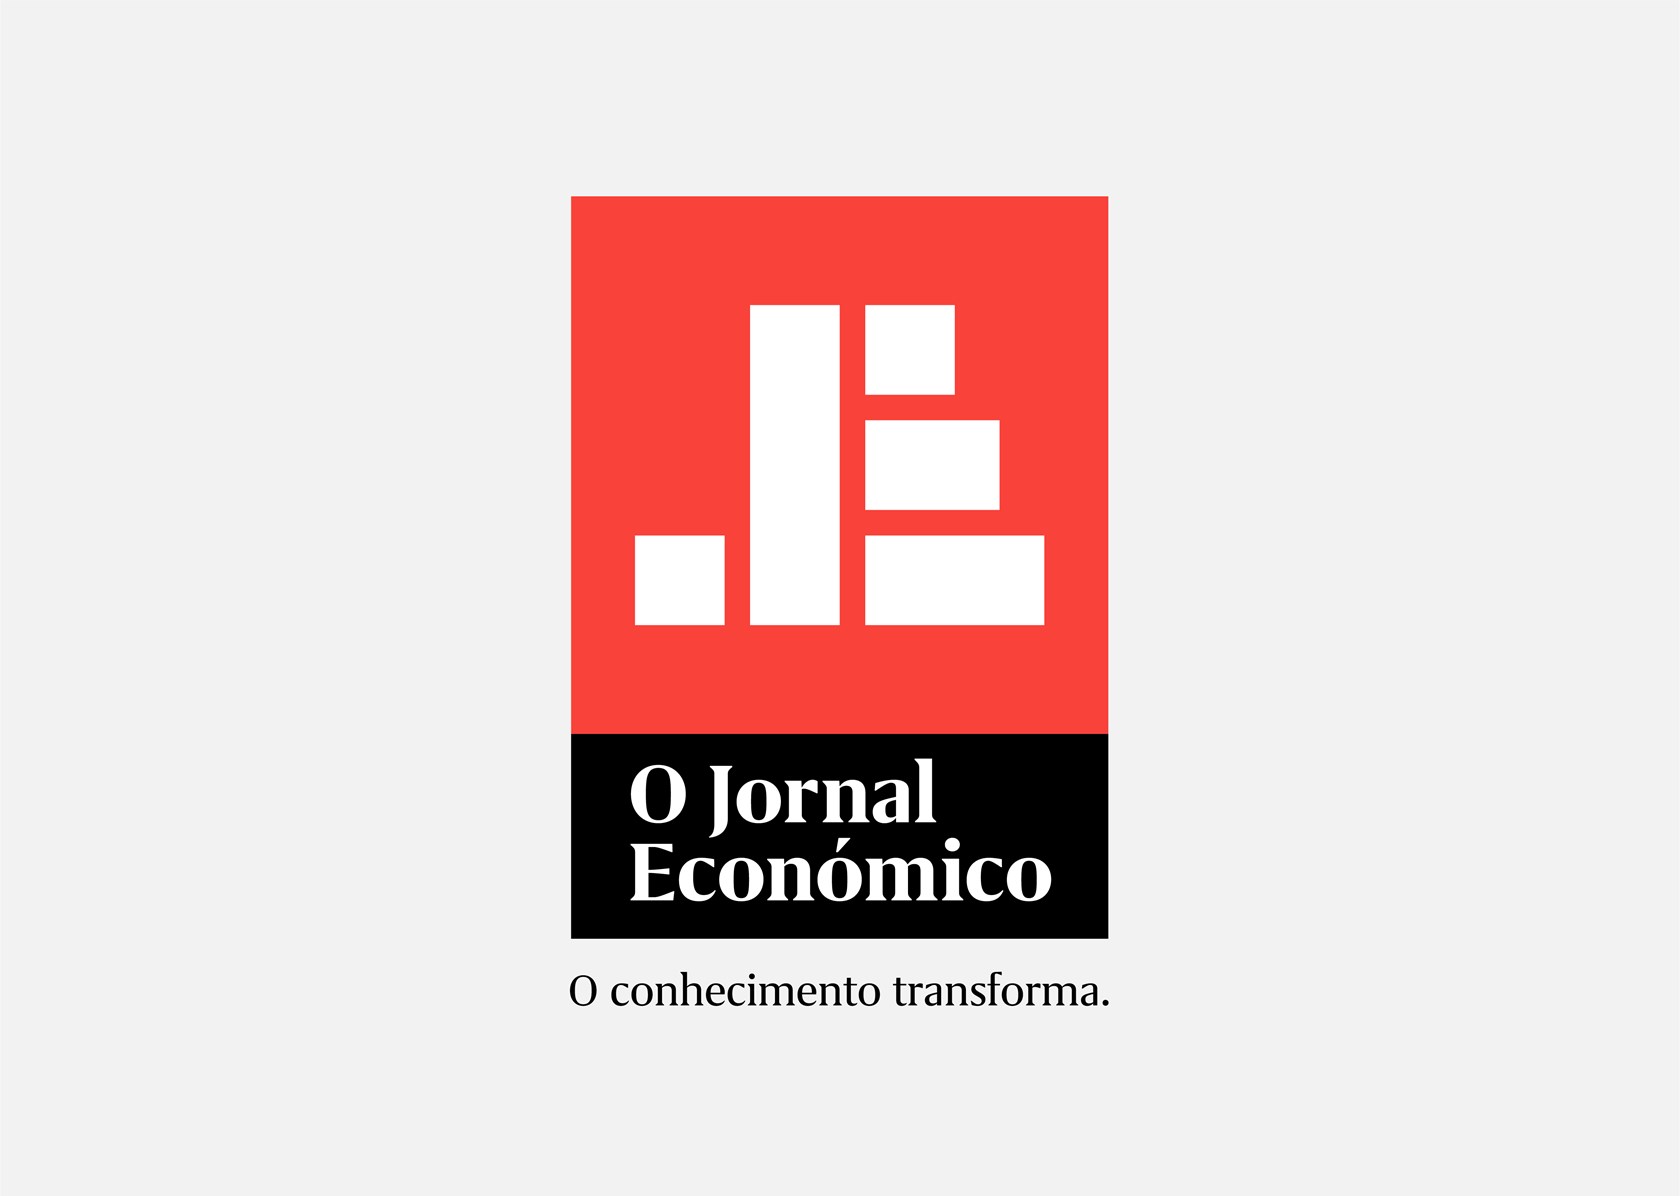 O Jornal Económico —
News at the turn of the page